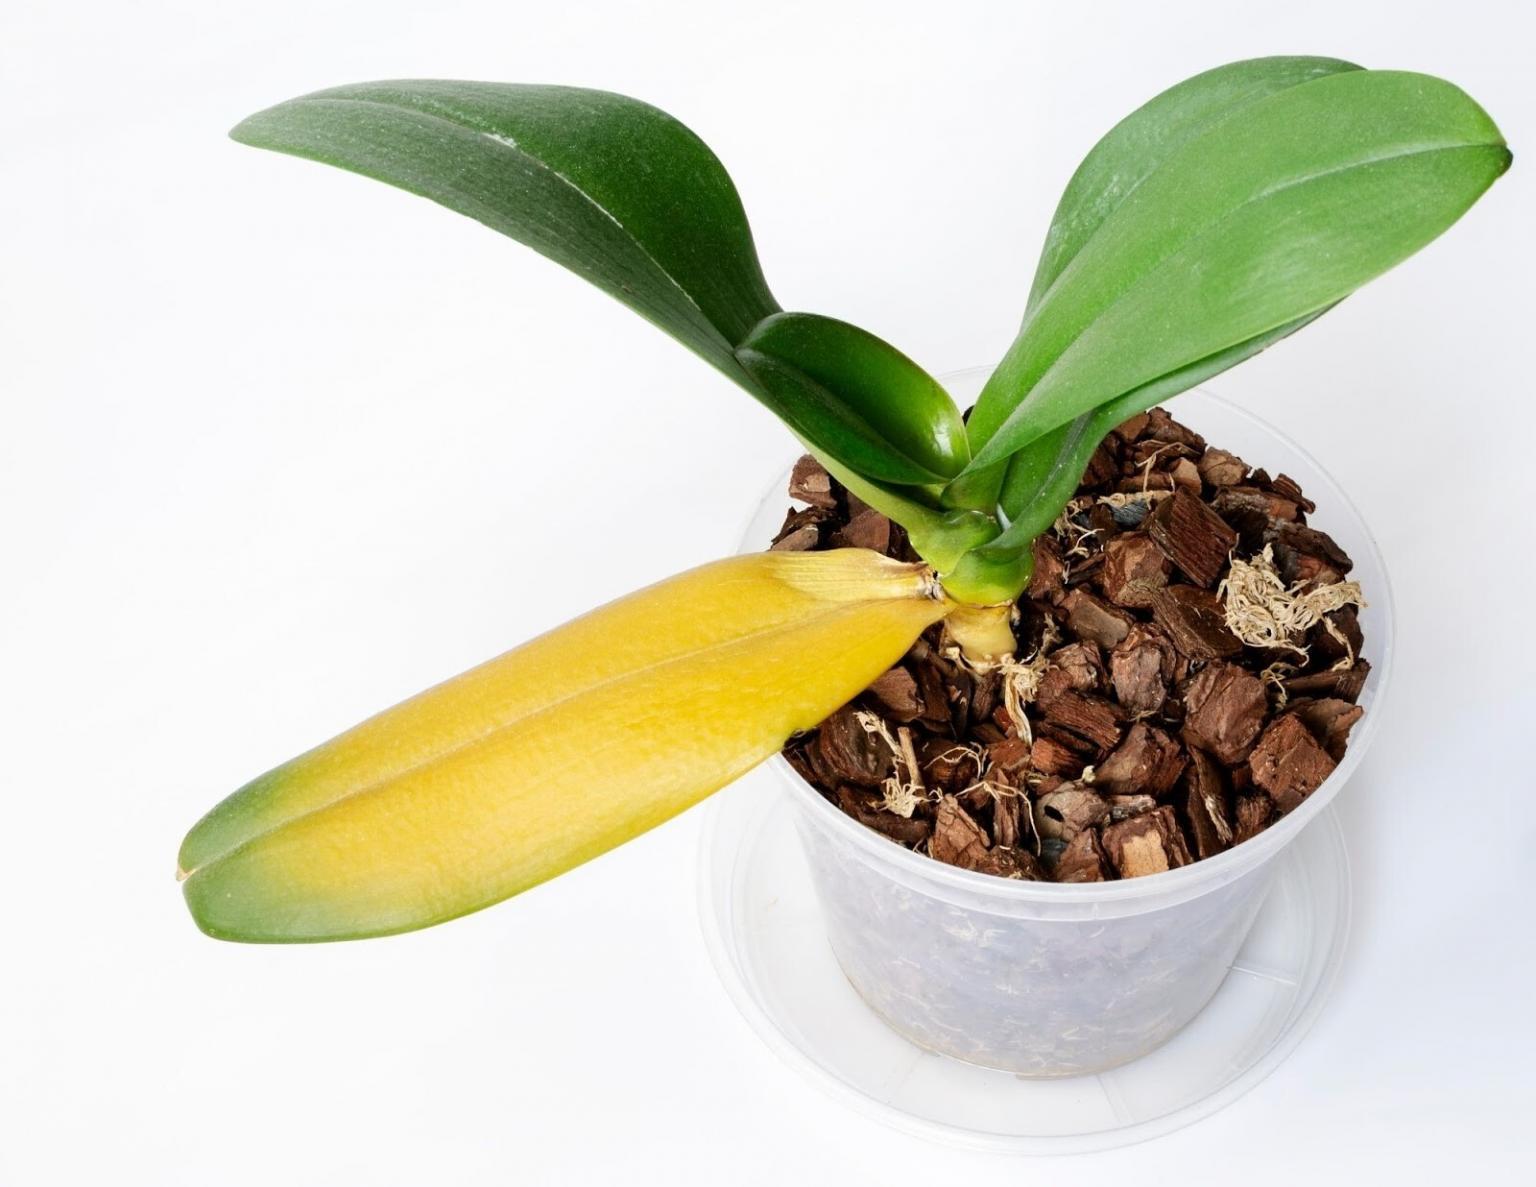 Cure Orchid Leaves Turning Yellow | 10 Common Causes What To Do When Orchid Stem Turns Yellow